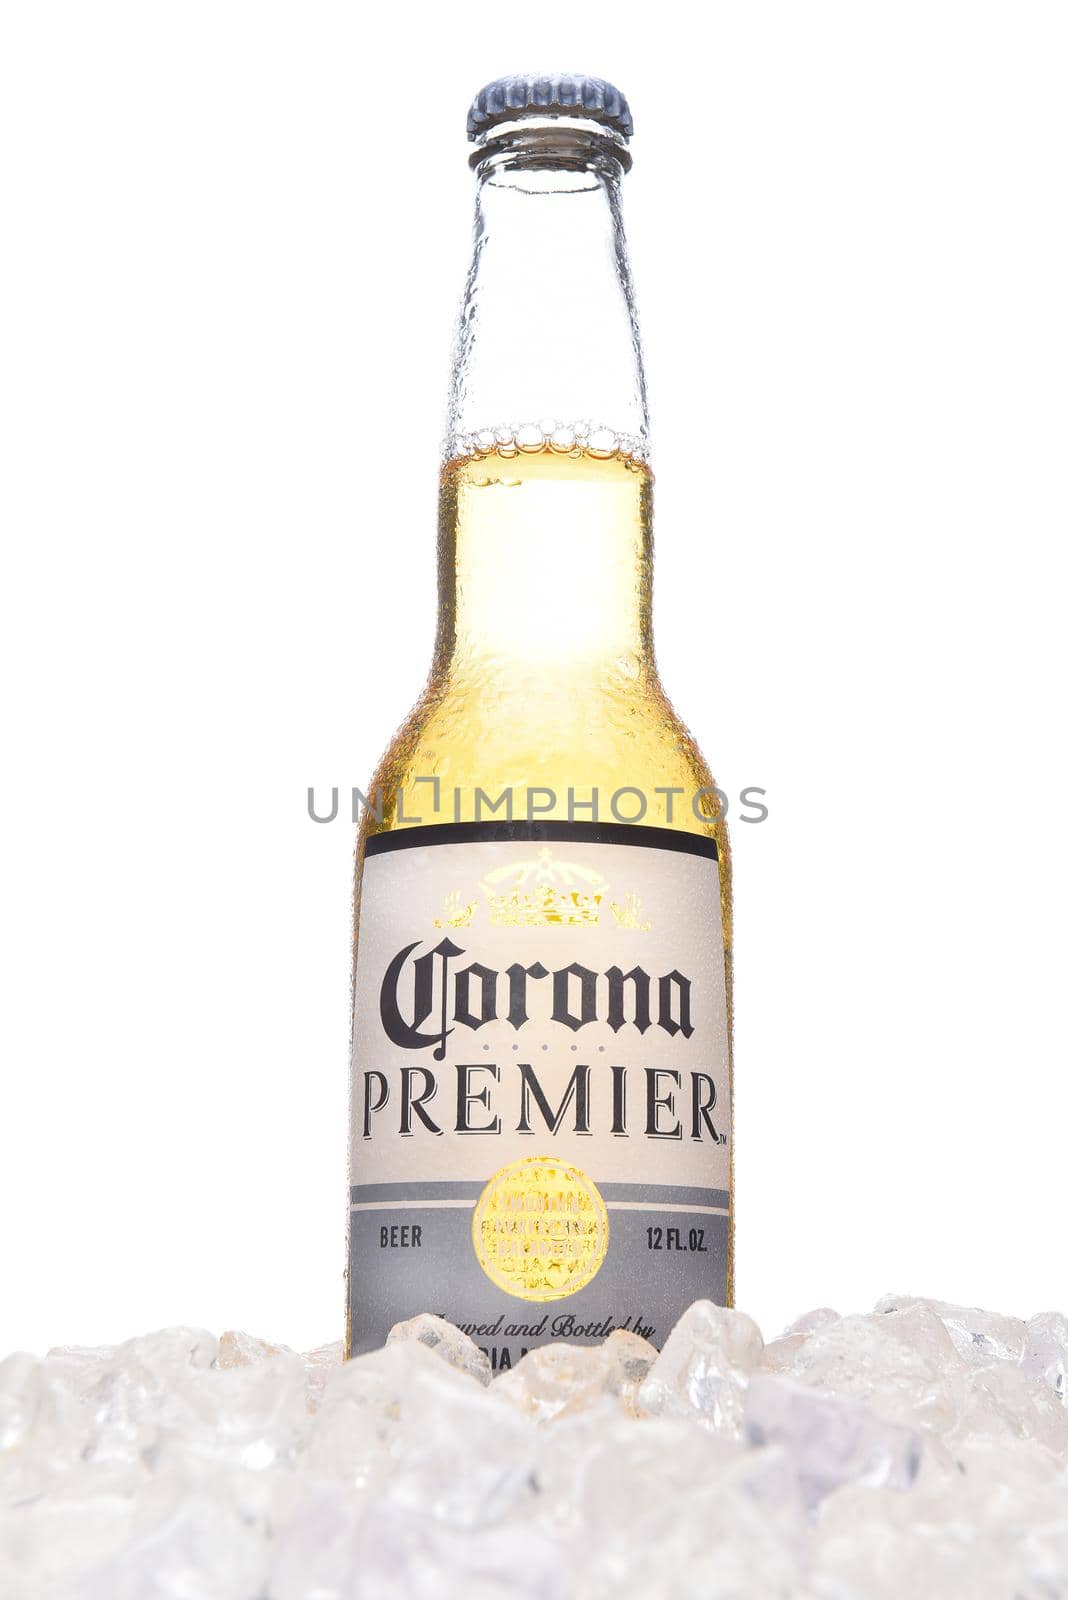 IRVINE, CALIFORNIA - MARCH 21, 2018:  A bottle of Corona Premier in ice. Corona Premier is premium light beer with 2.6 grams of carbs and 90 calories.